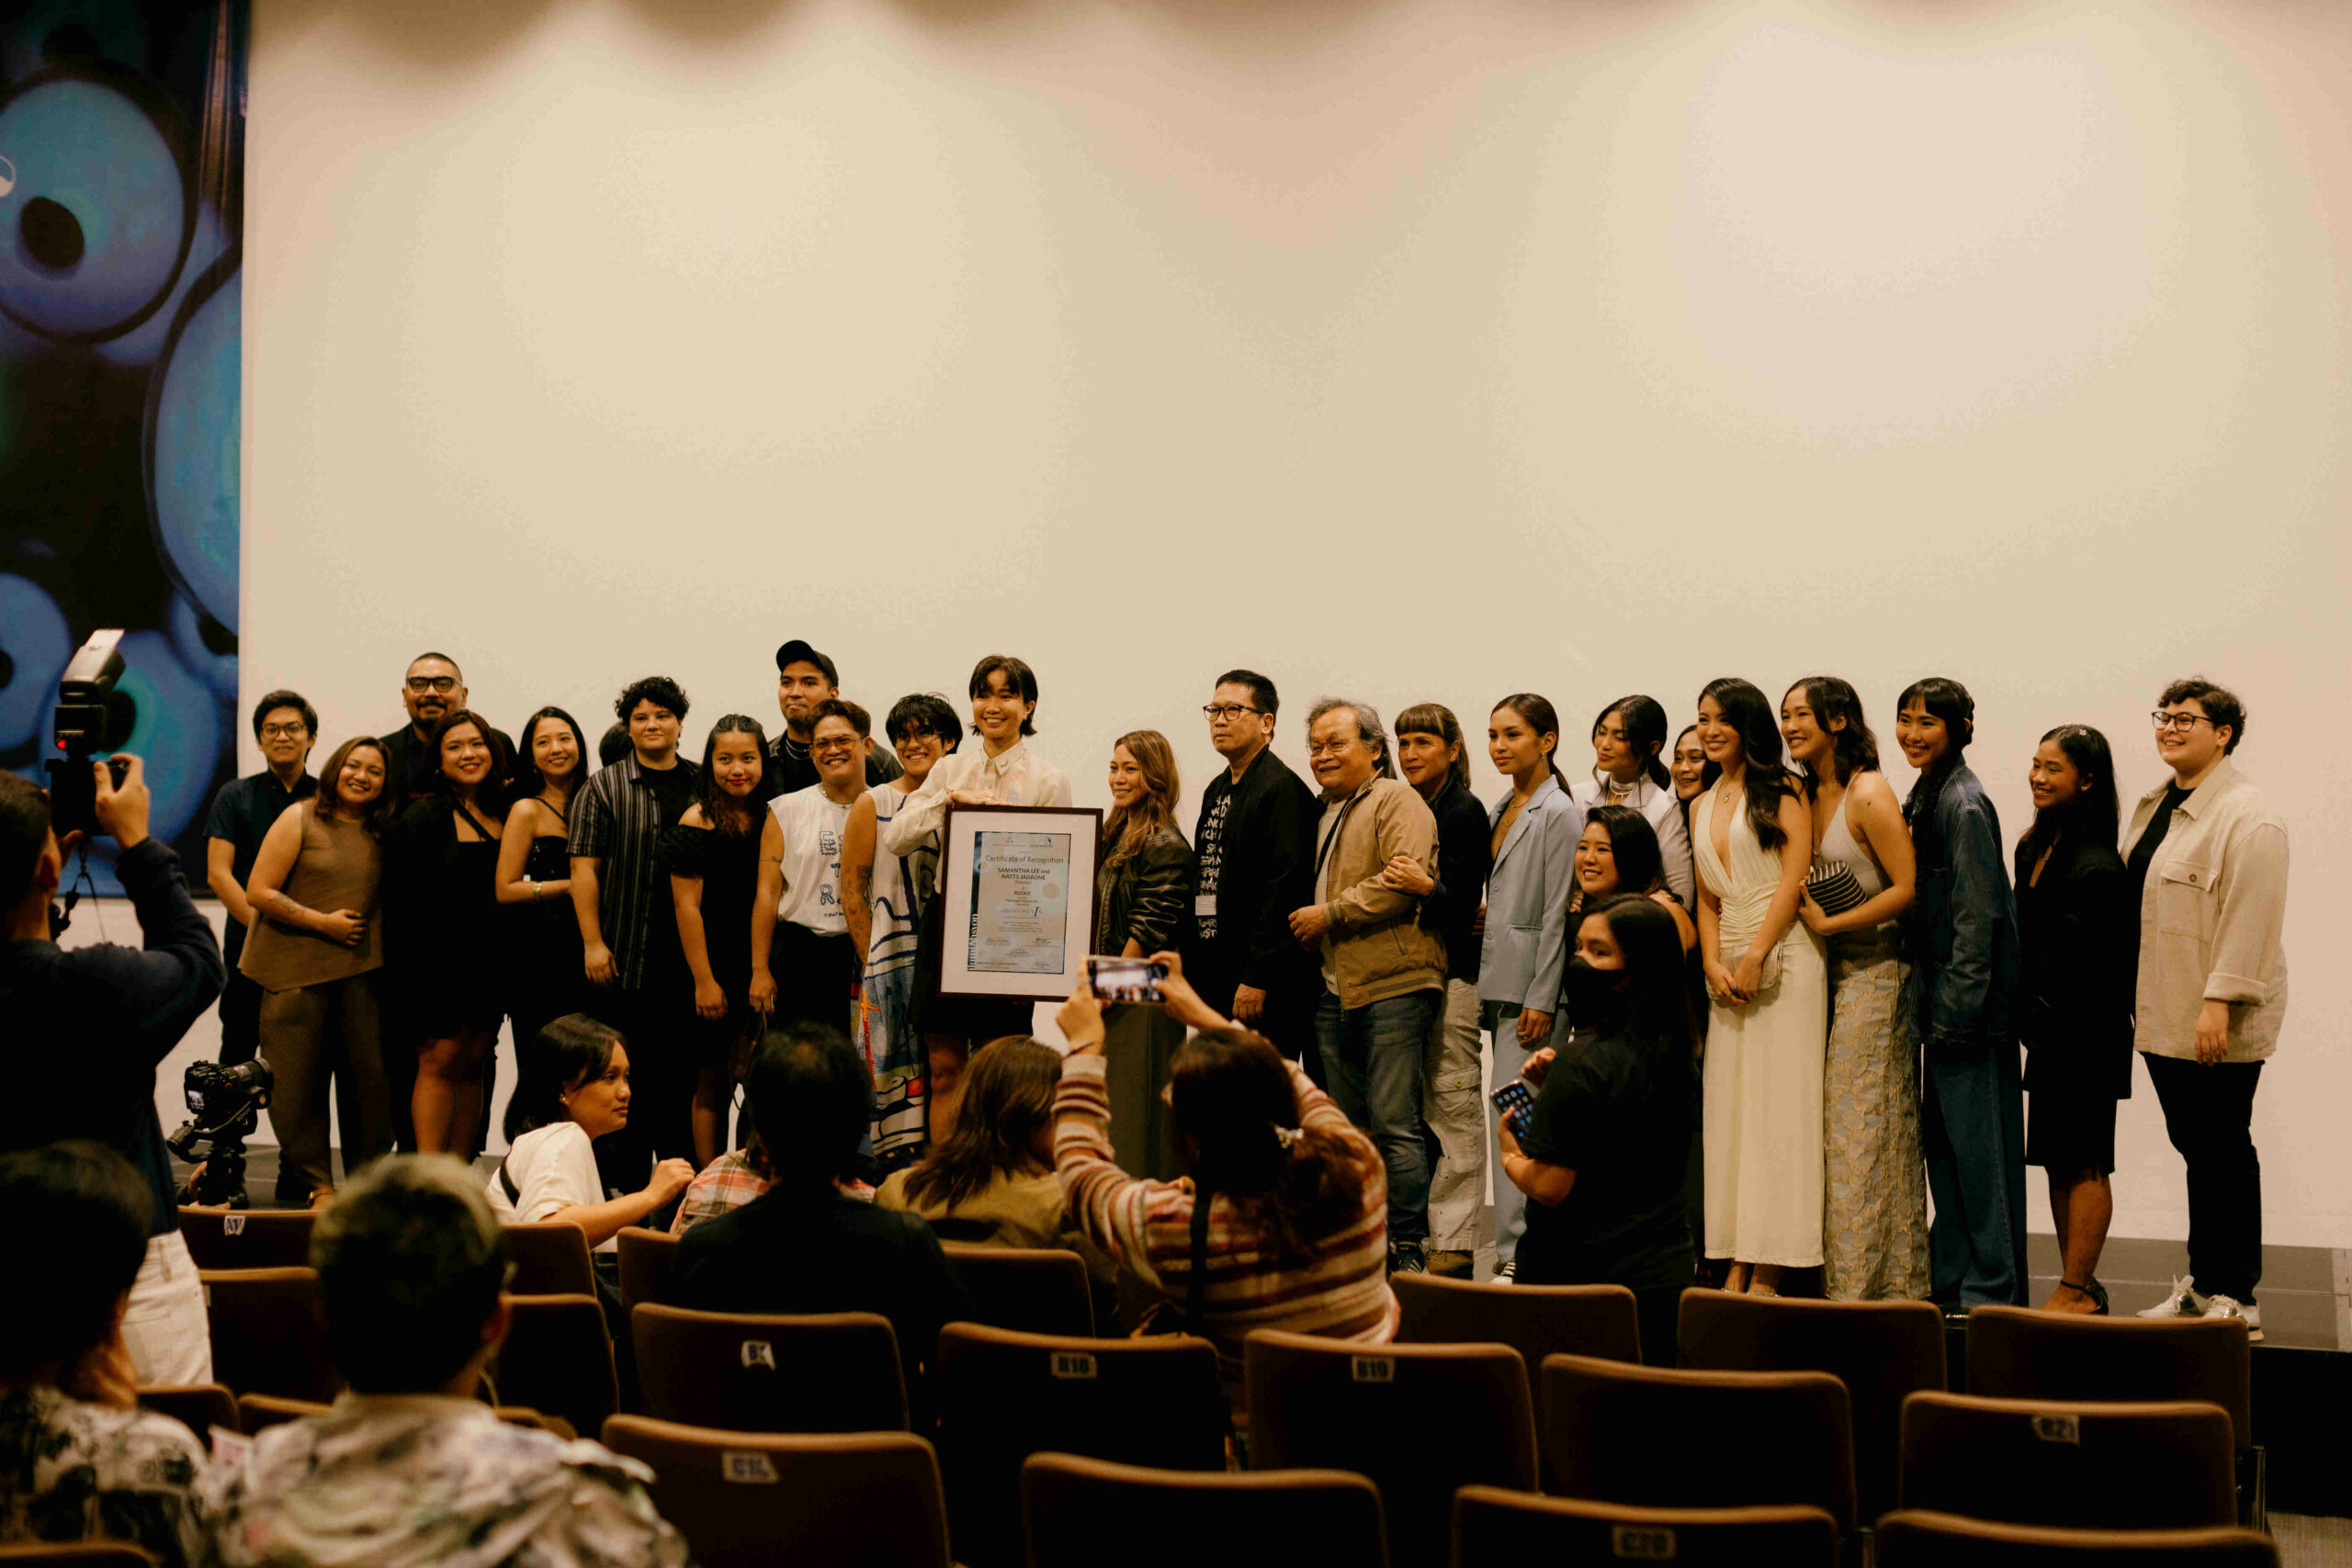 Cast and crew of Rookie at Cinemalaya